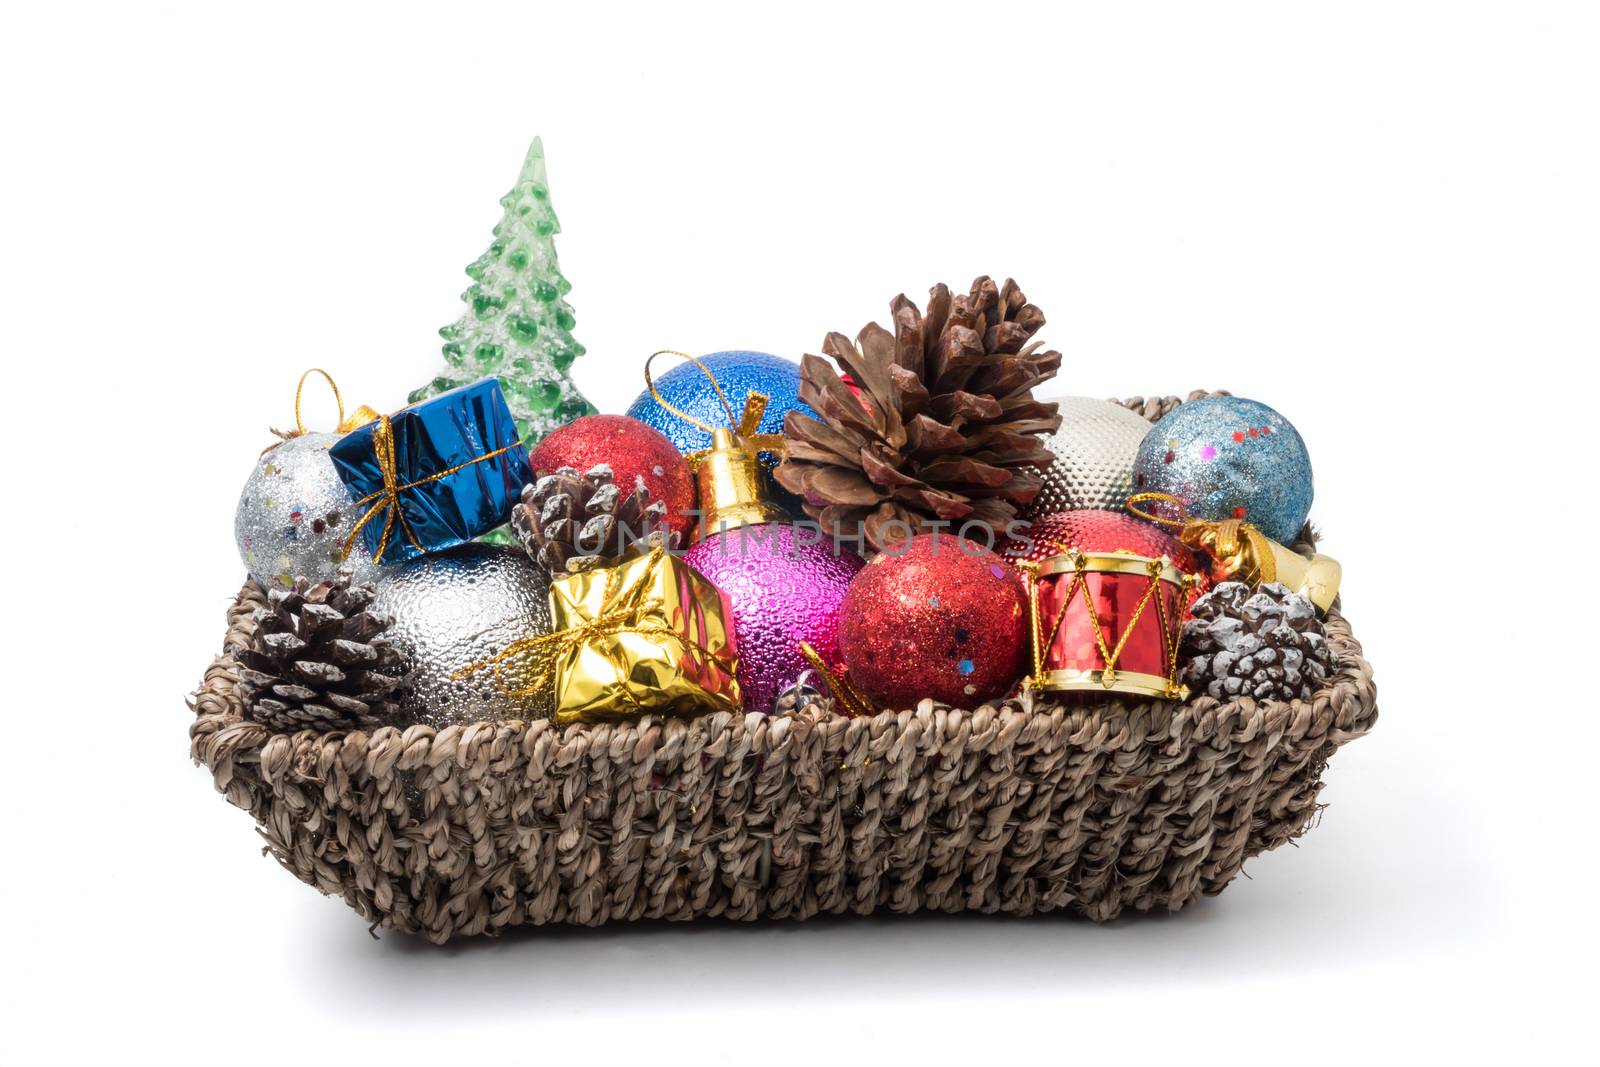 Christmas decoration in basket on white background.